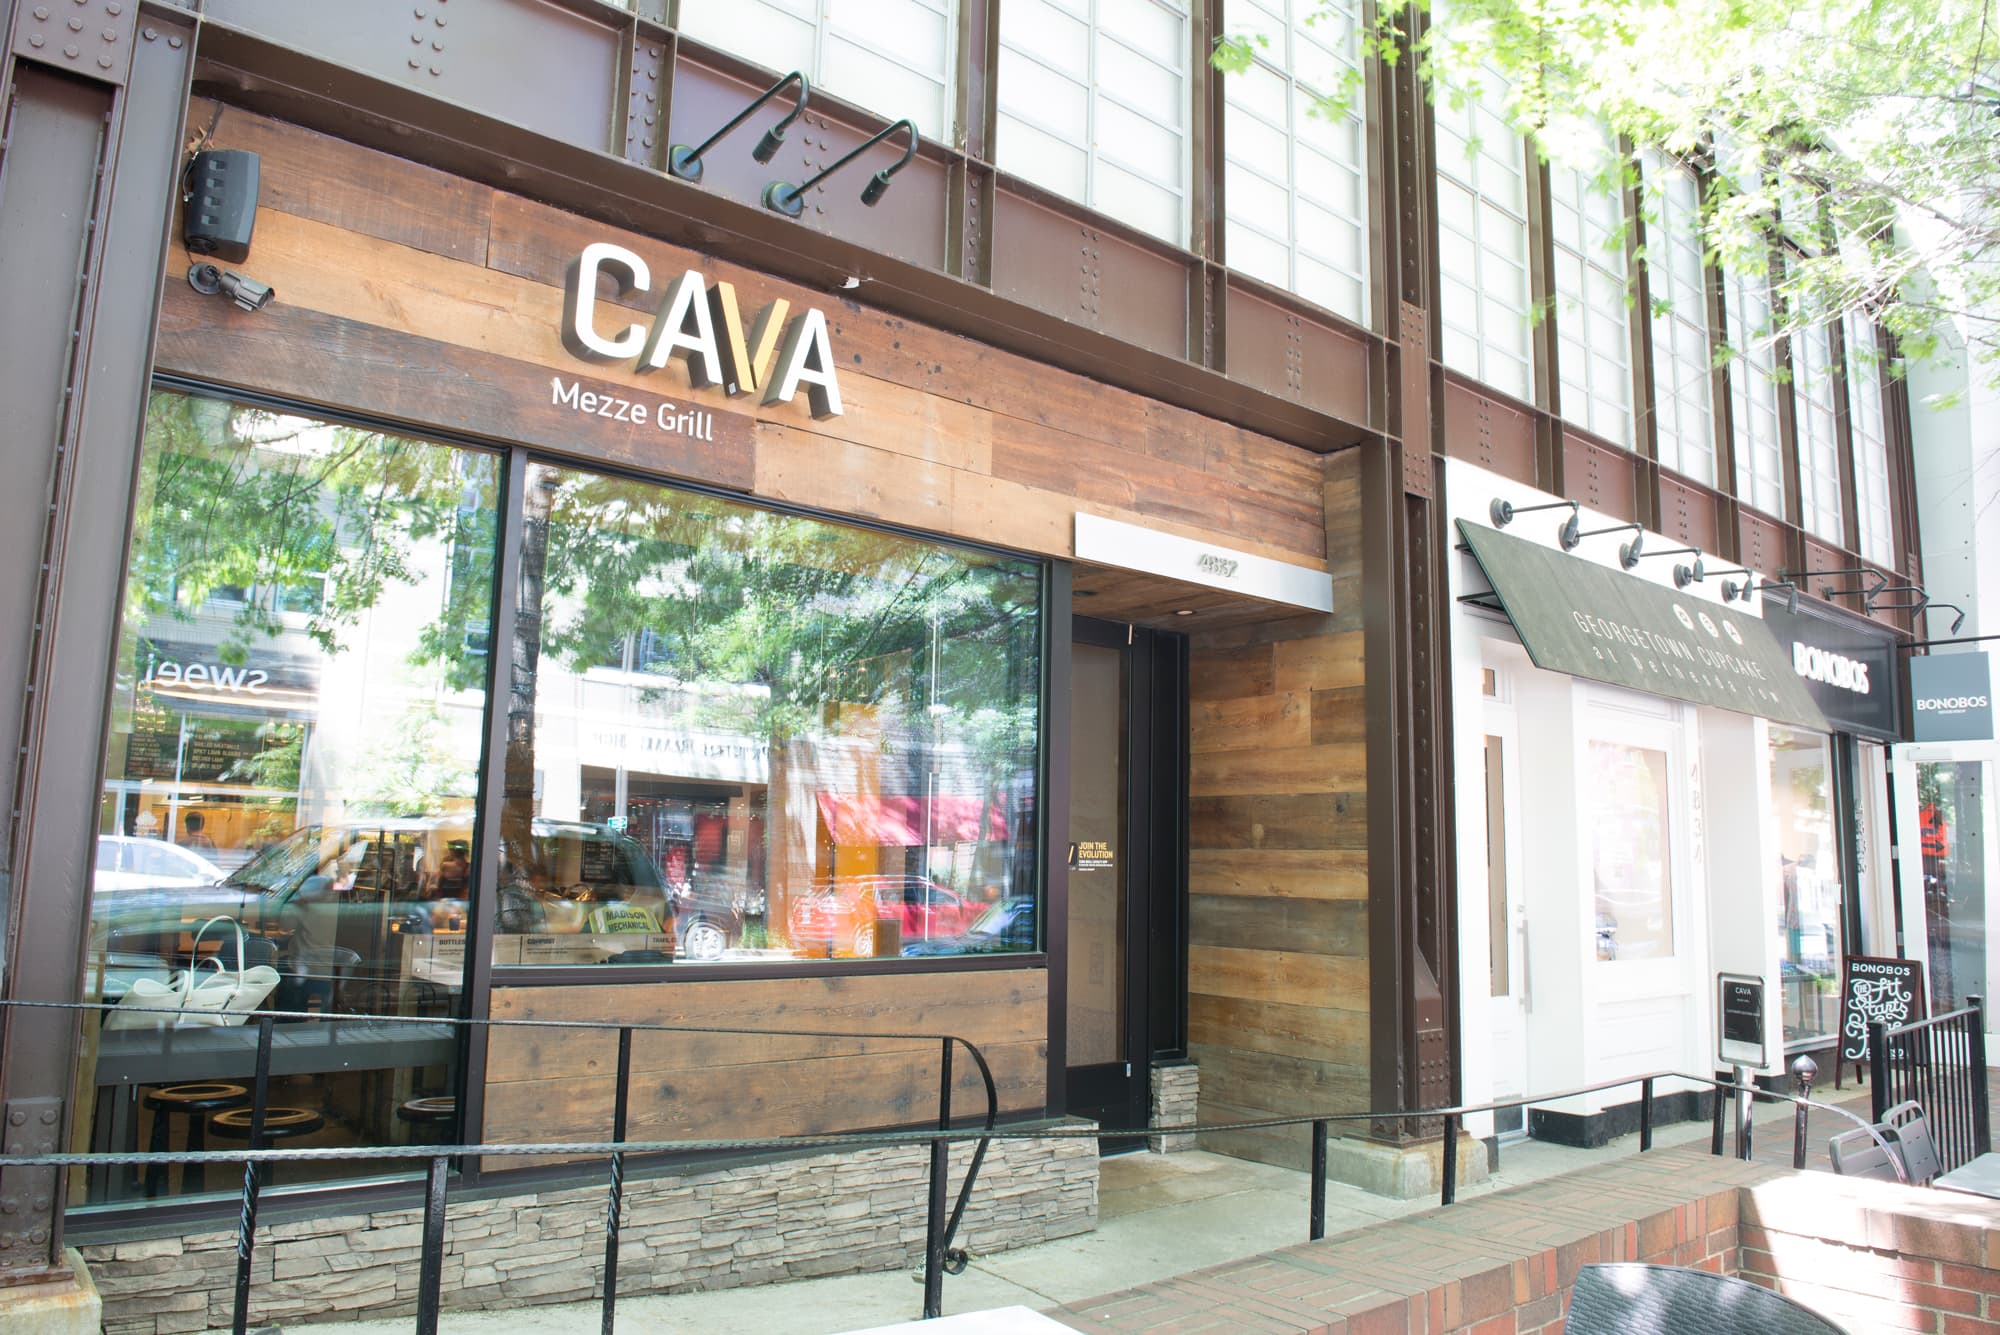 Cava targets suburban growth as the pandemic changes consumption trends